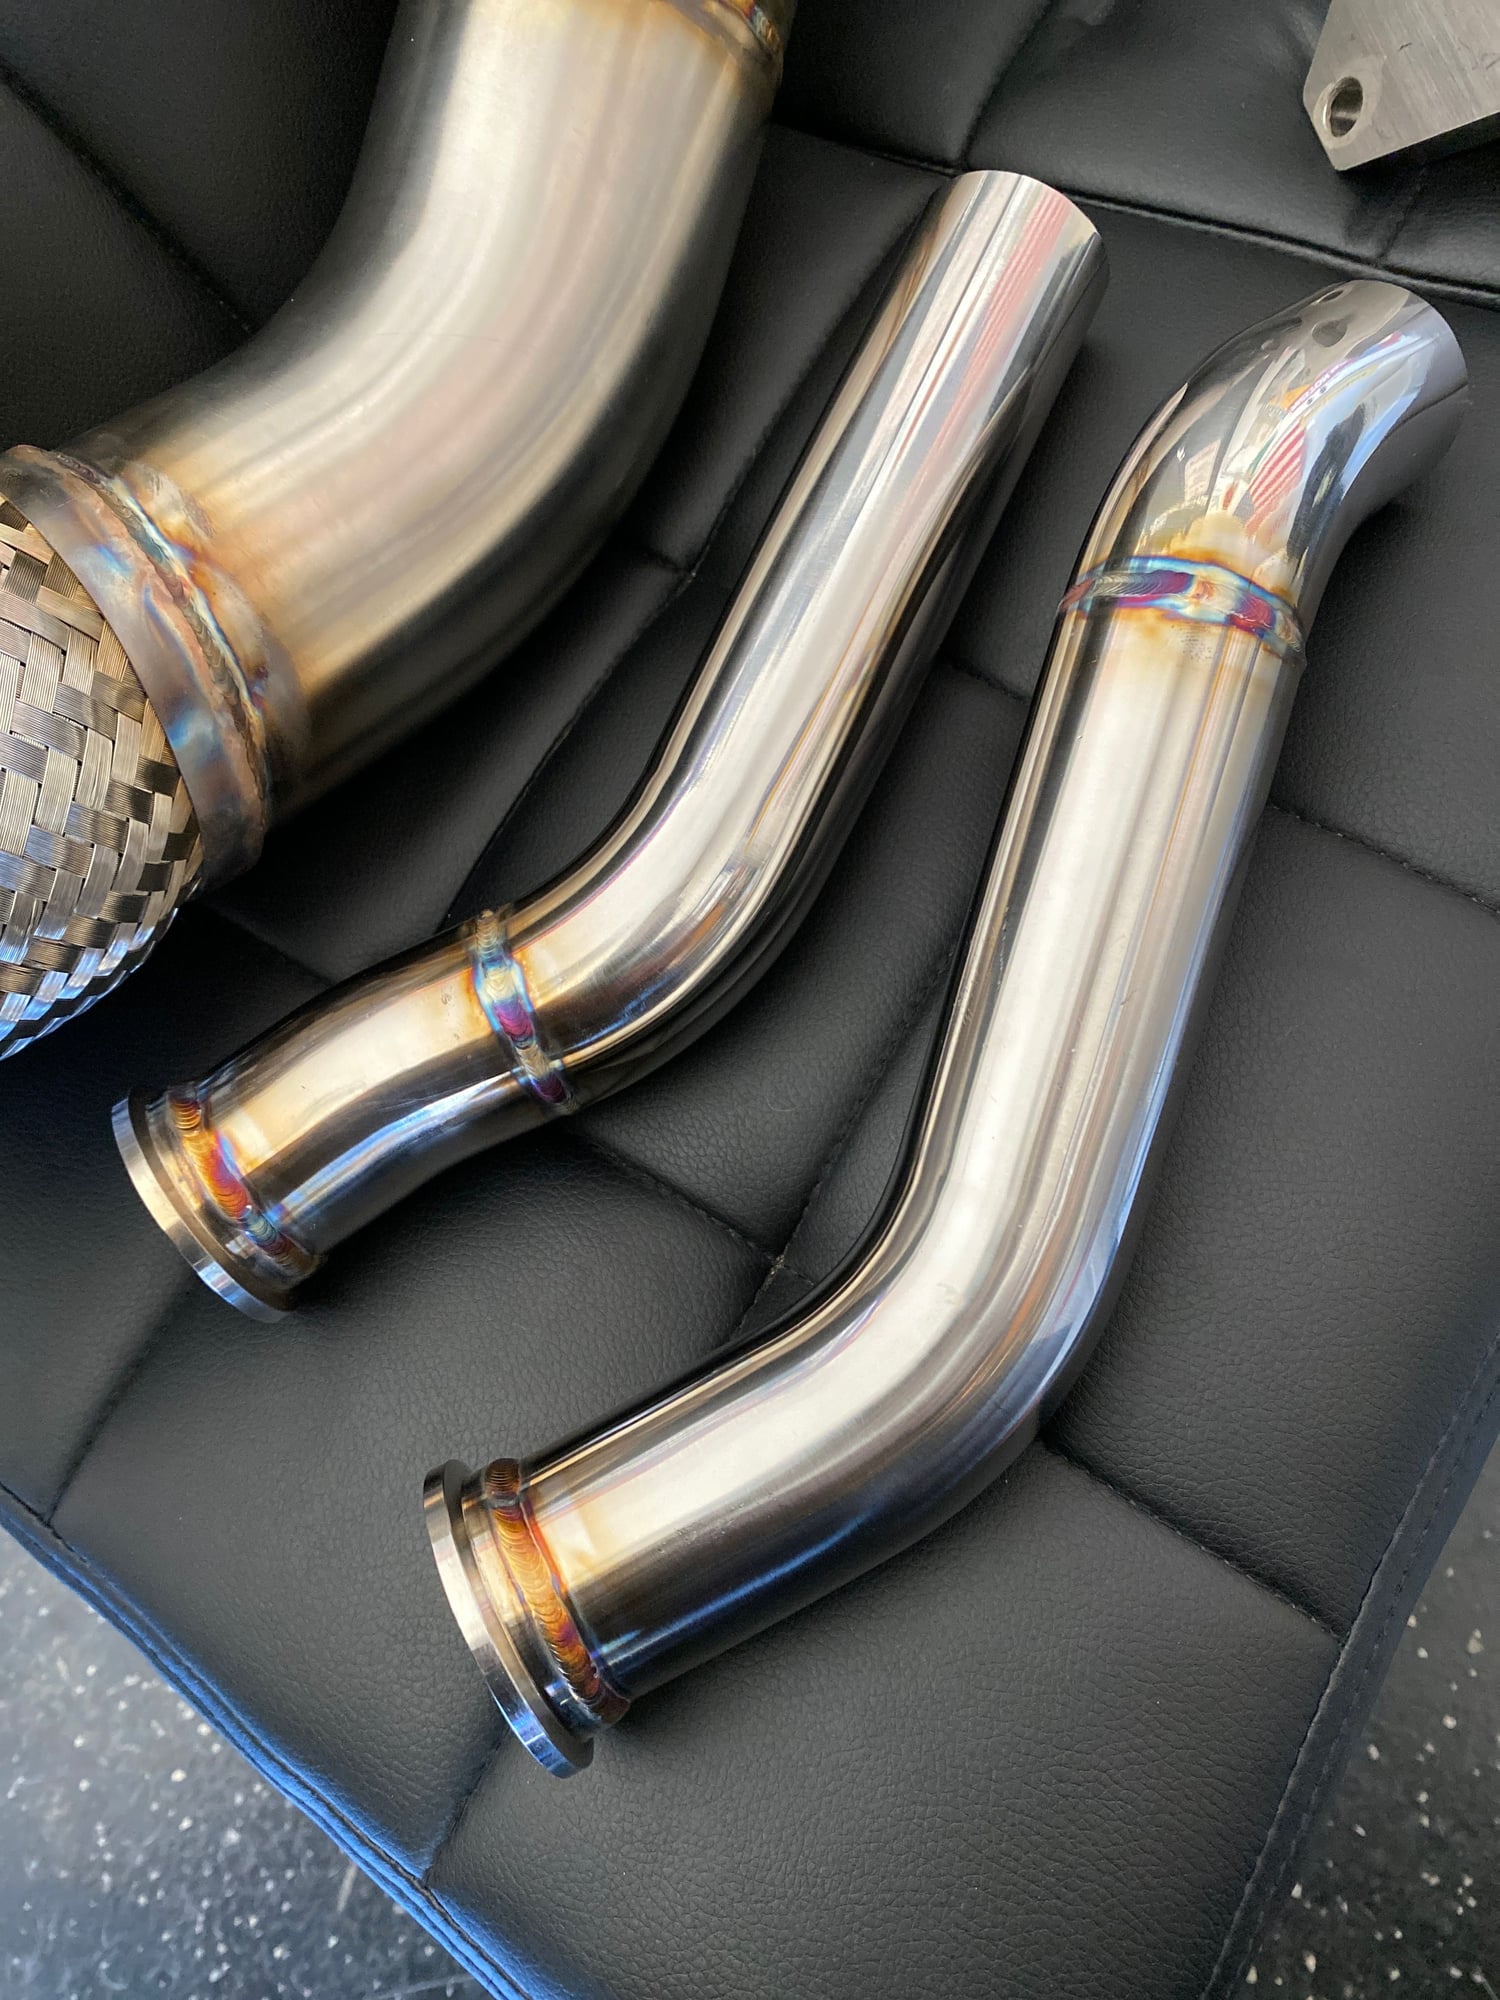 Engine - Power Adders - “Elite” Exhaust manifold/3.5” down pipe and wastegate tubes - New - 1993 to 2002 Mazda RX-7 - Rio Vista, CA 94571, United States